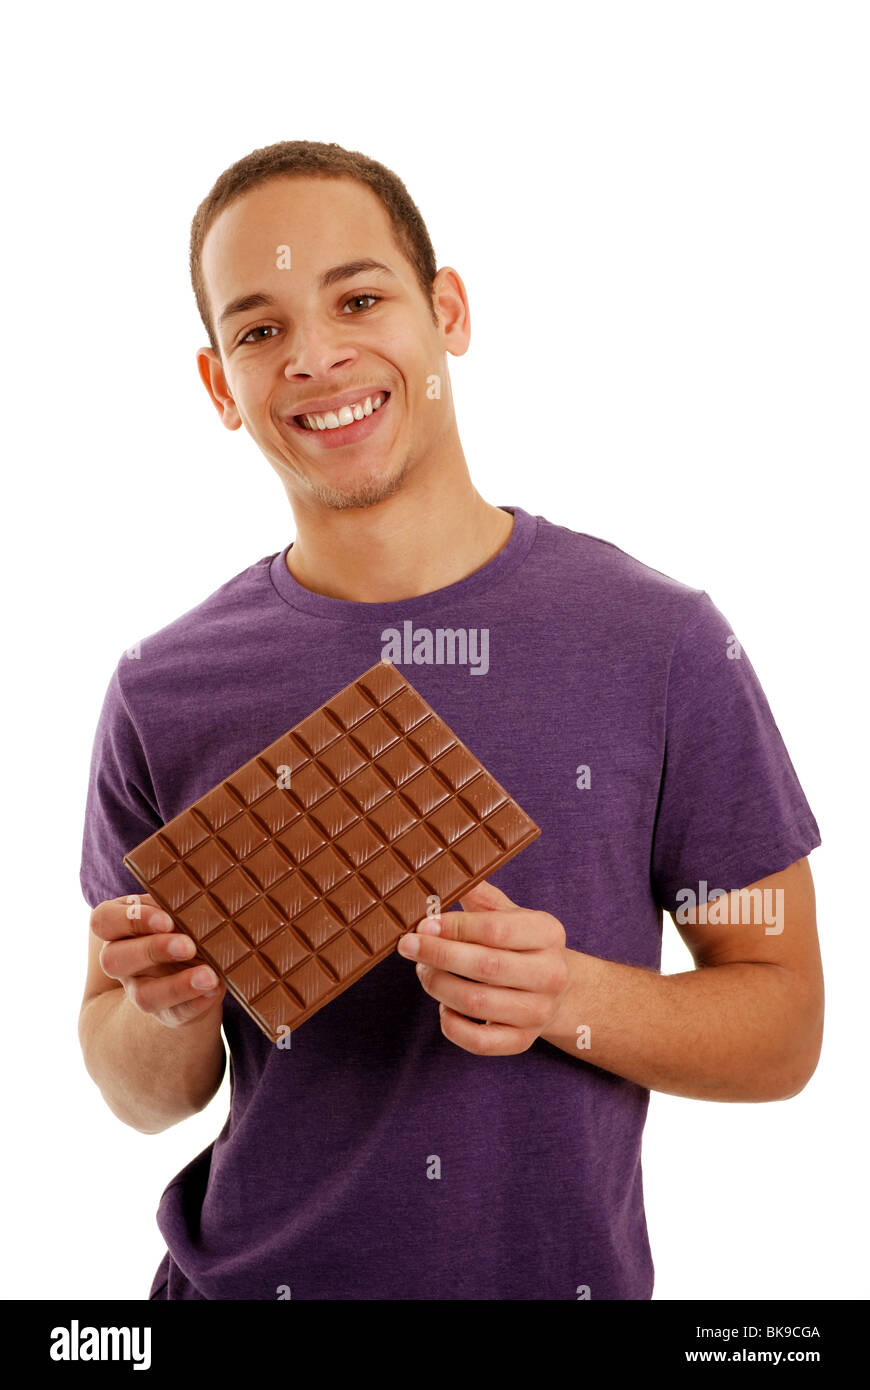 Boy holding a bar of chocolate Stock Photo